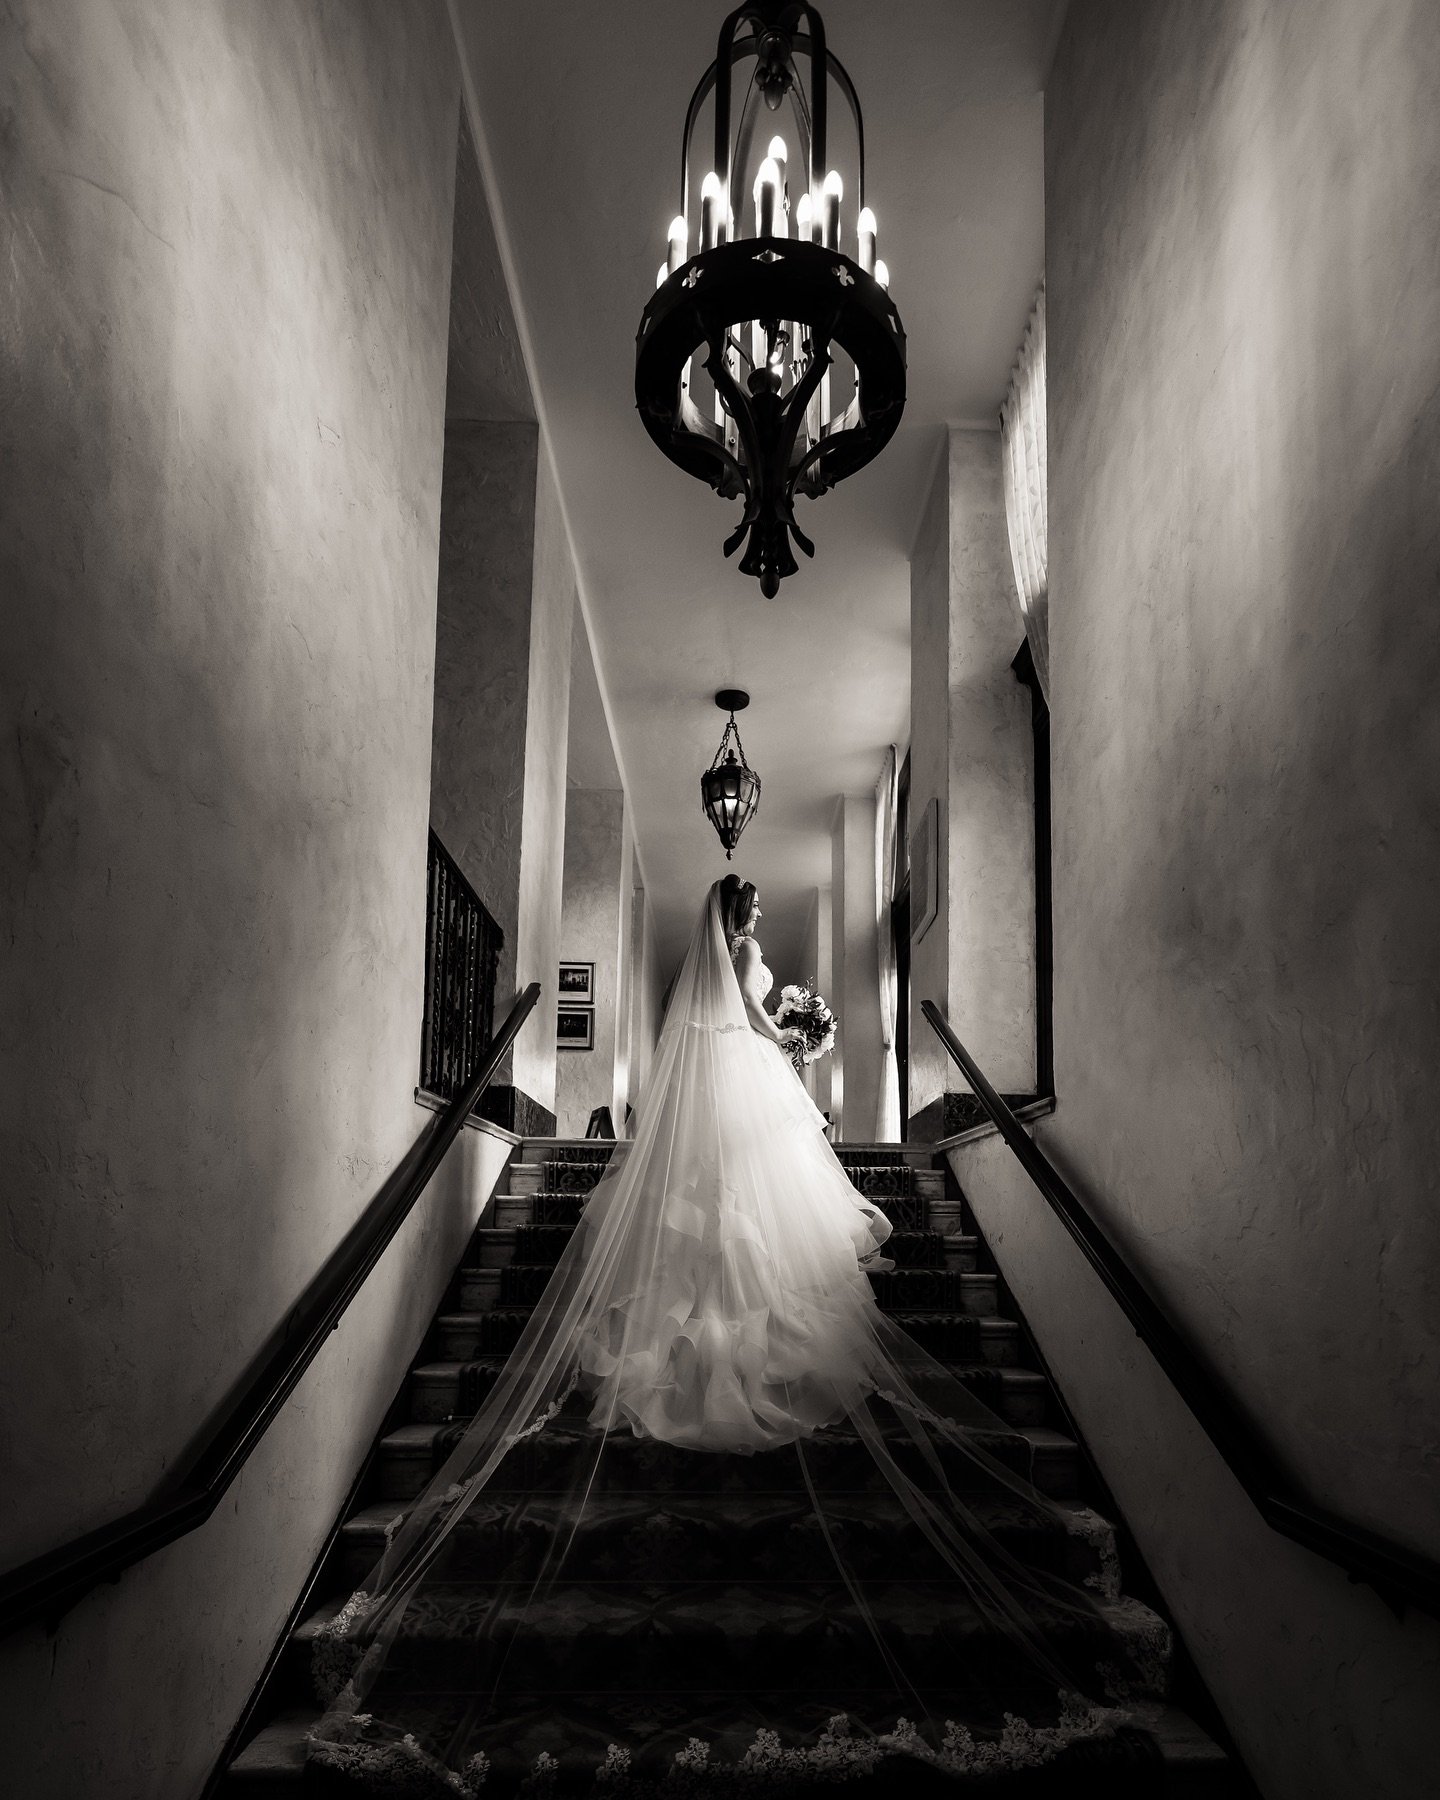 Gracefully ascending the steps of elegance at the Biltmore Hotel, where every moment is a masterpiece.  #biltmorehotel #biltmorehotelcoralgables #biltmorehotelwedding #timelesselegance #miamiwedding #miamiweddingplanner ⠀
__________ ⠀
Credits: ⠀
Wedd